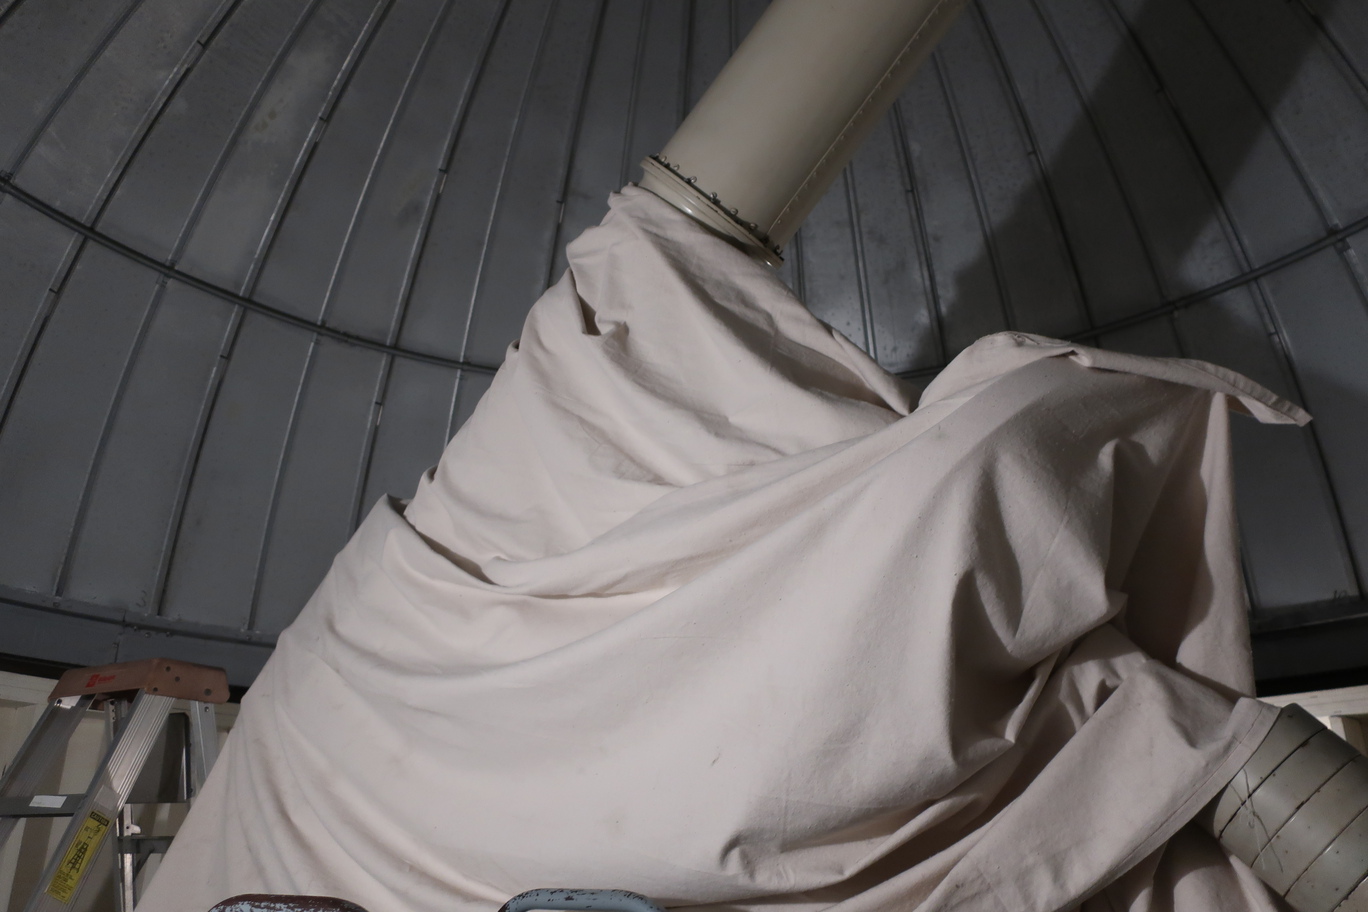 the telescope with the dust cover on and in a stored position